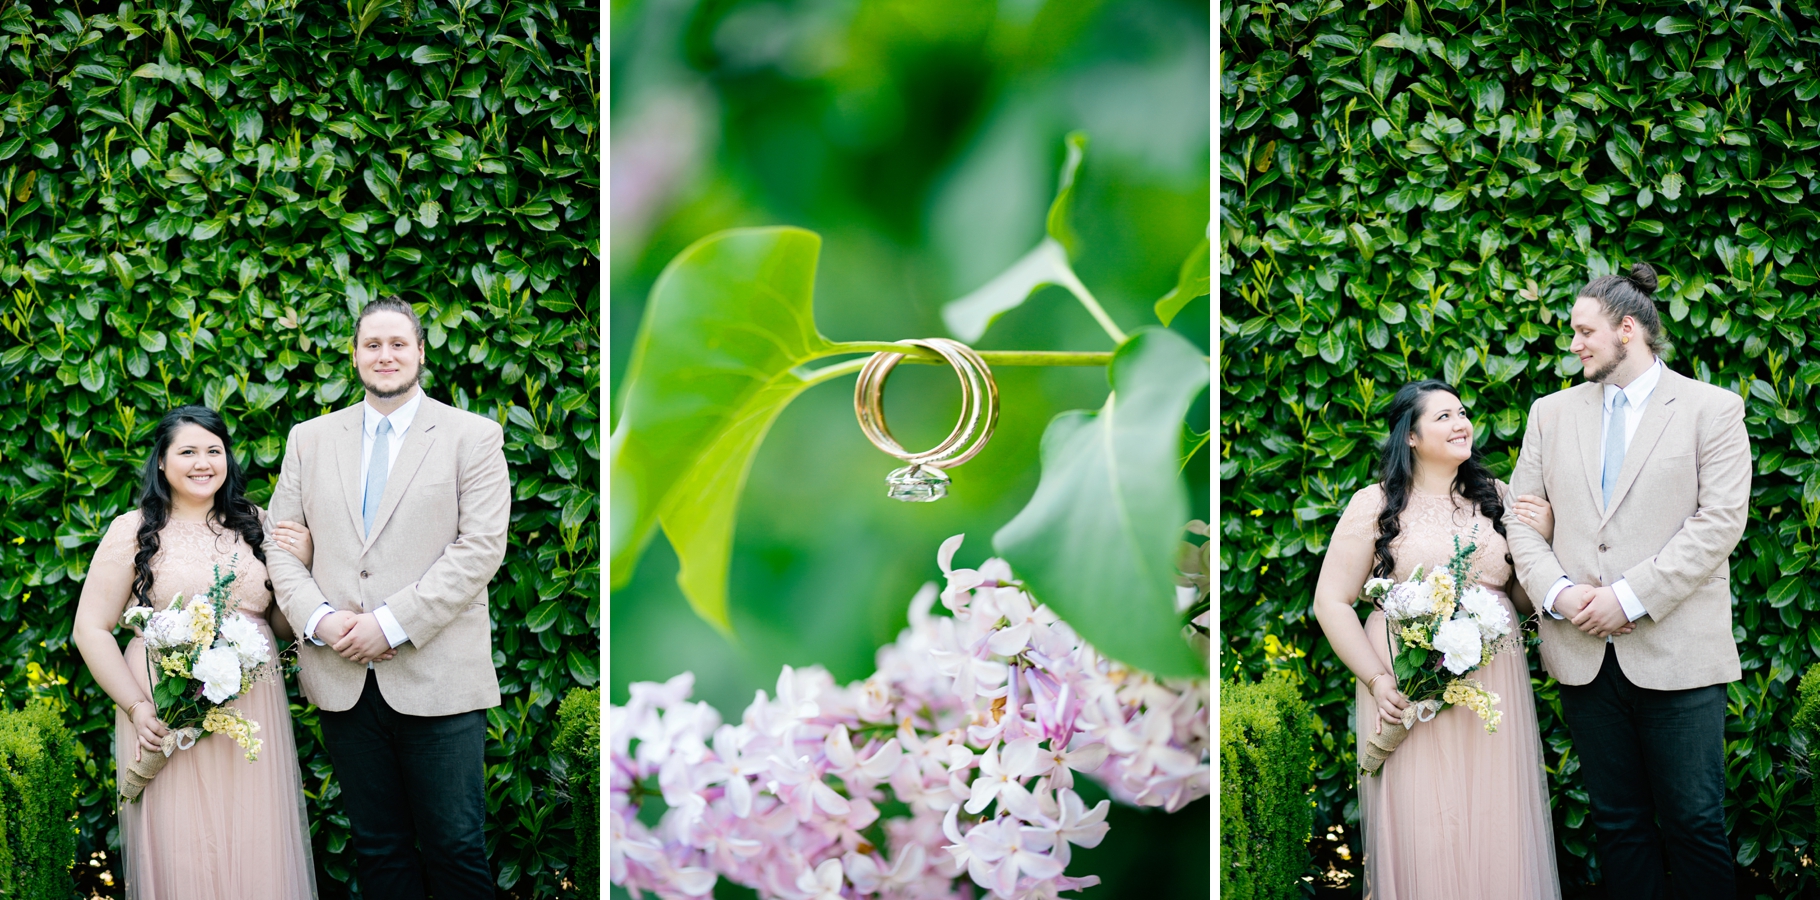 15-Bride-Groom-Bridal-Portraits-Garden-Elopement-Woodinville-Seattle-Photographer-Wedding-Photography-by-Betty-Elaine-Lilac-Wedding-Rings